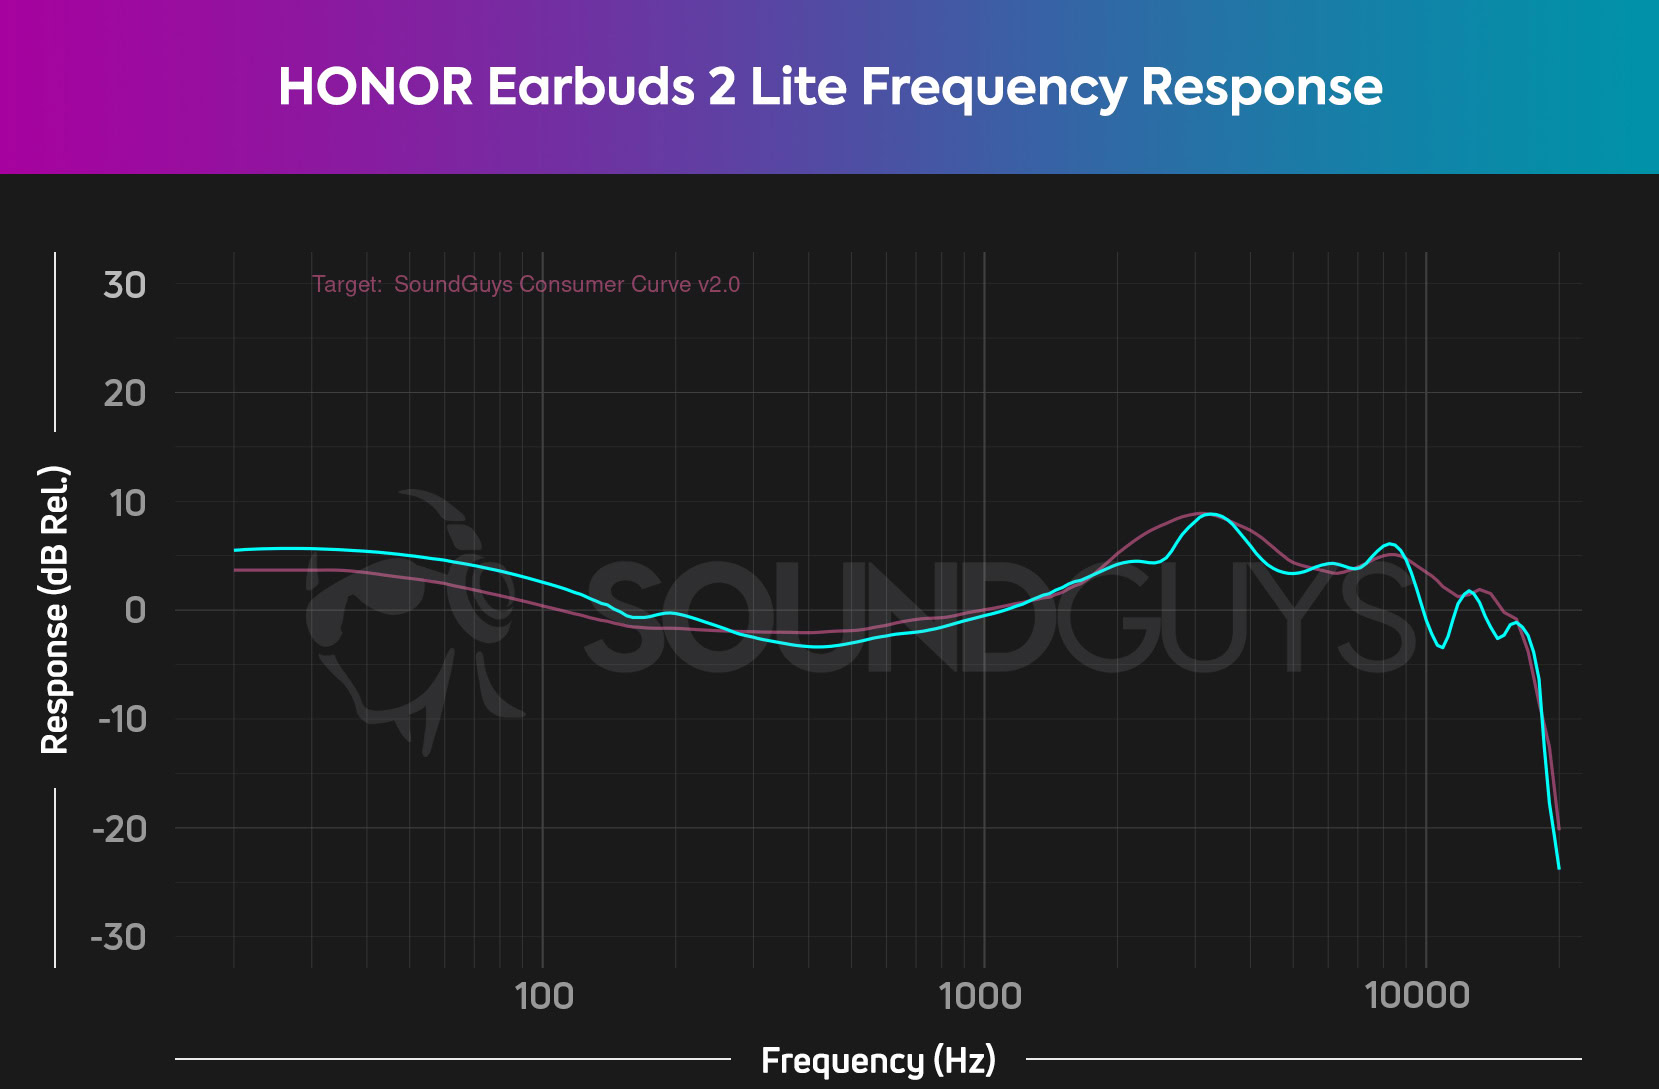 This shows the frequency response of Honor Earbuds 2 lite.